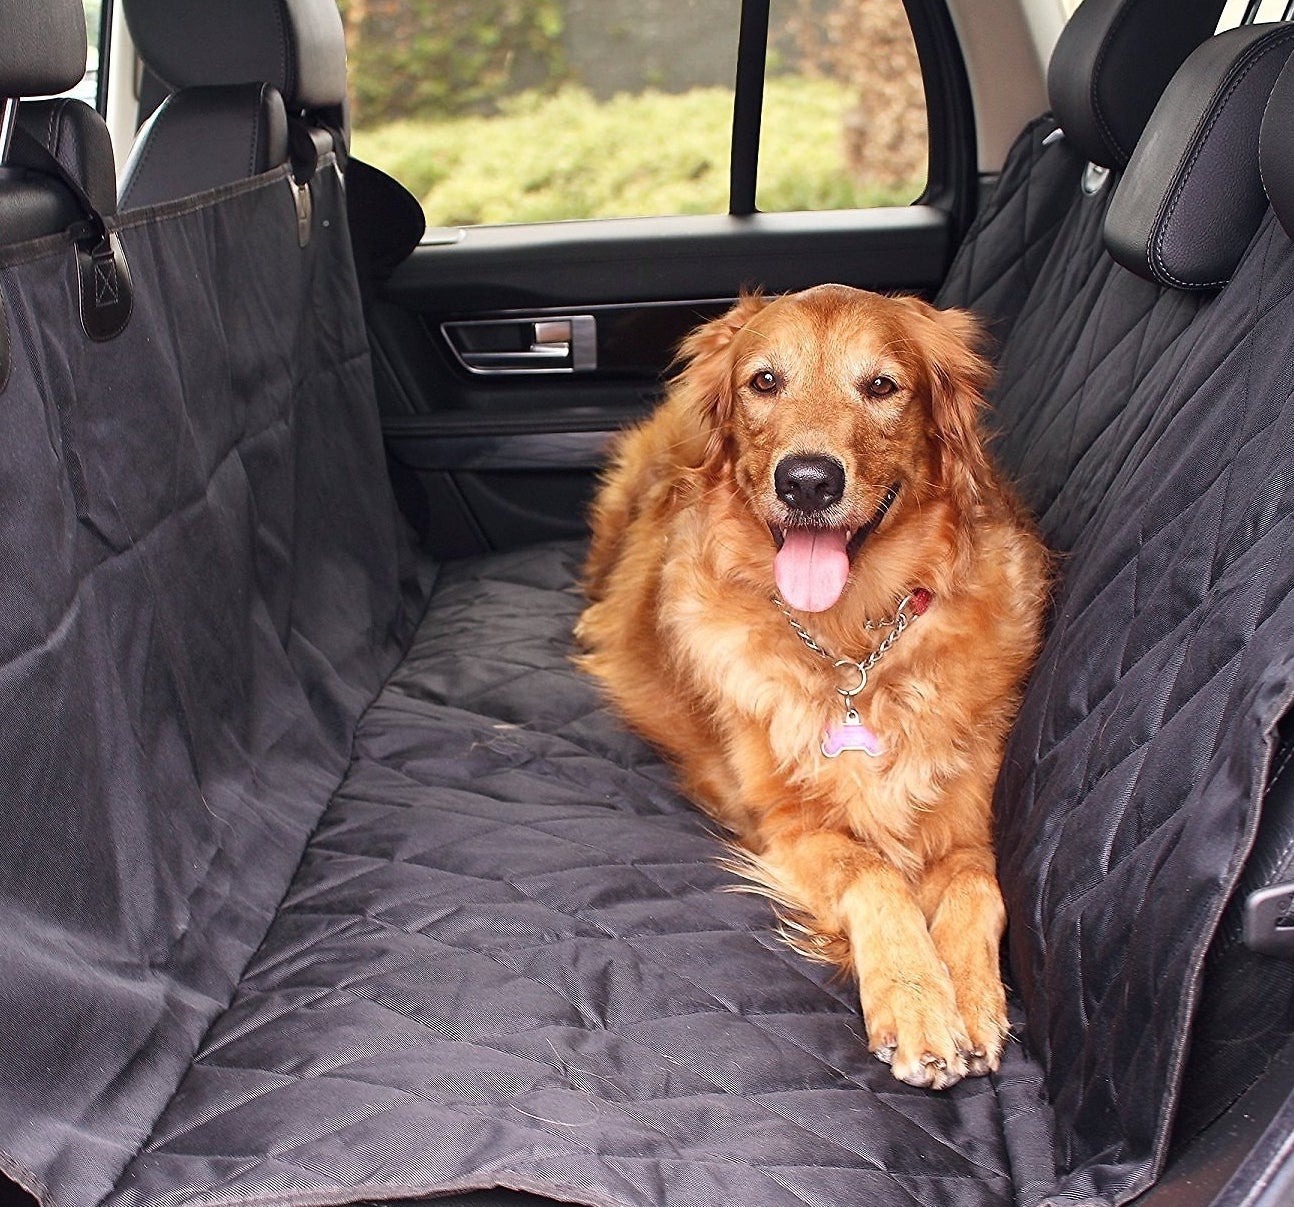 A Golden Retriever laying down in the backseat of a car with a car seat cover over the seats